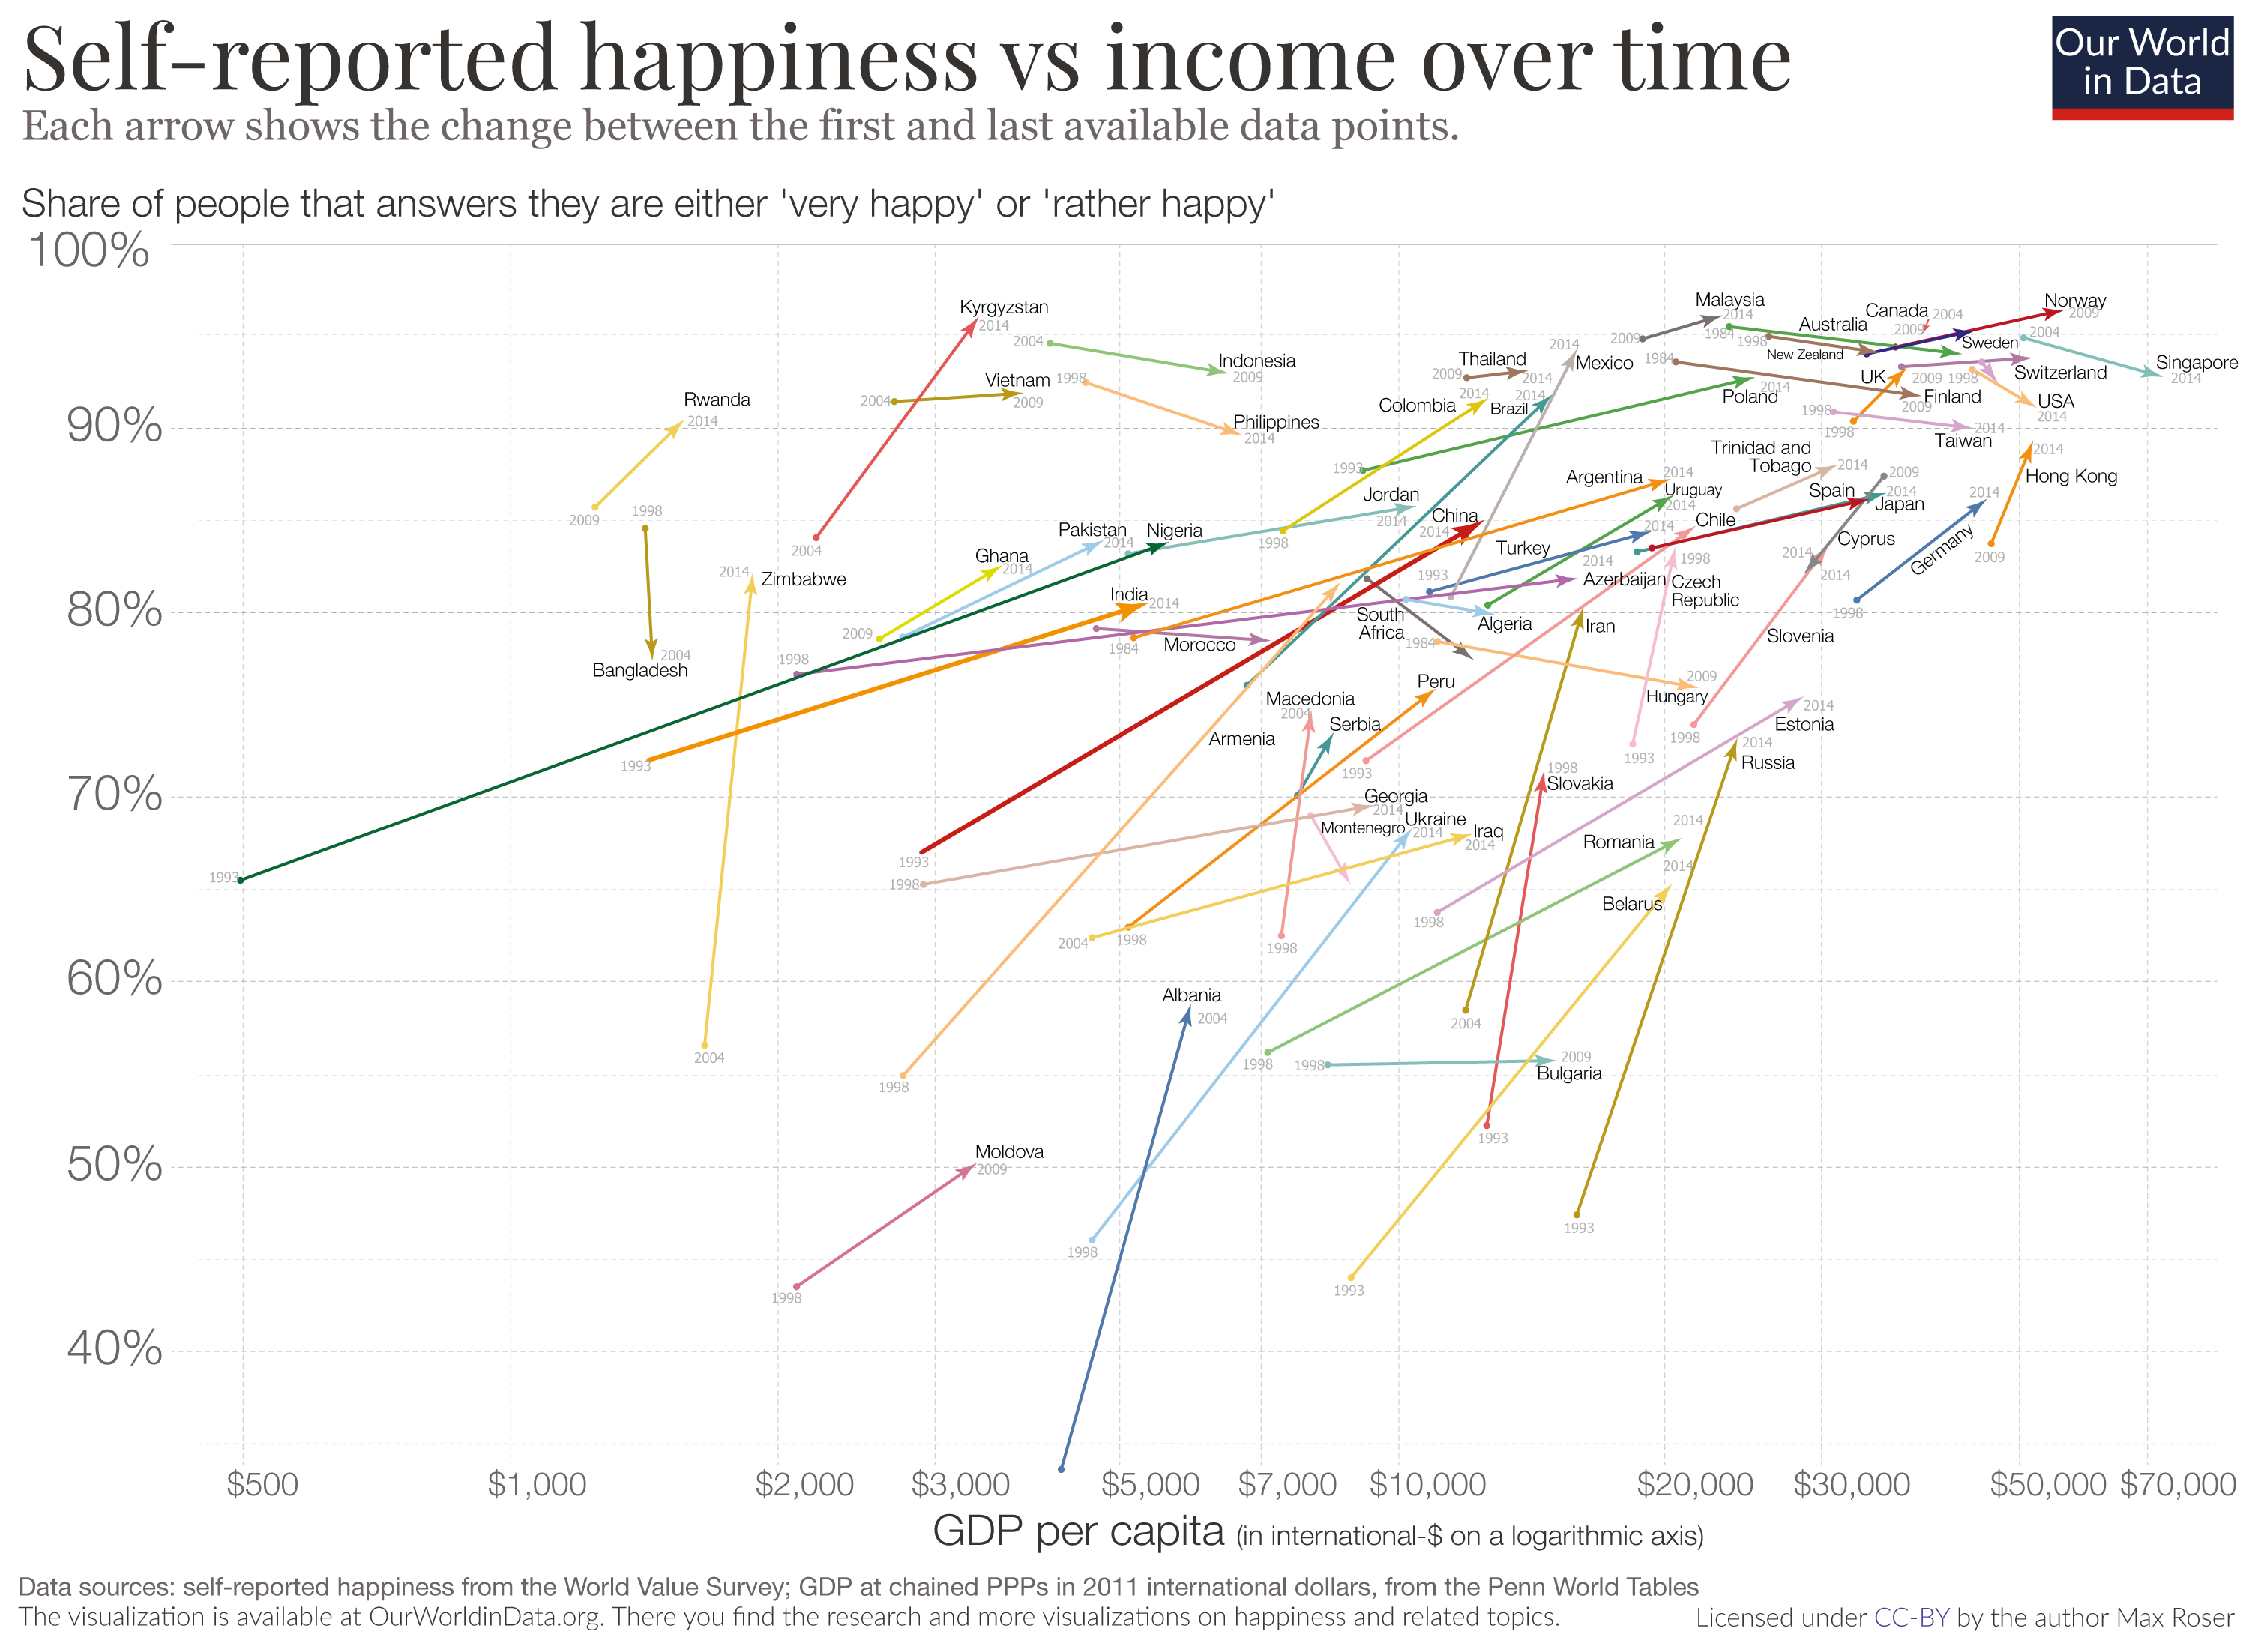 Mapped: Global Happiness Levels in 2022